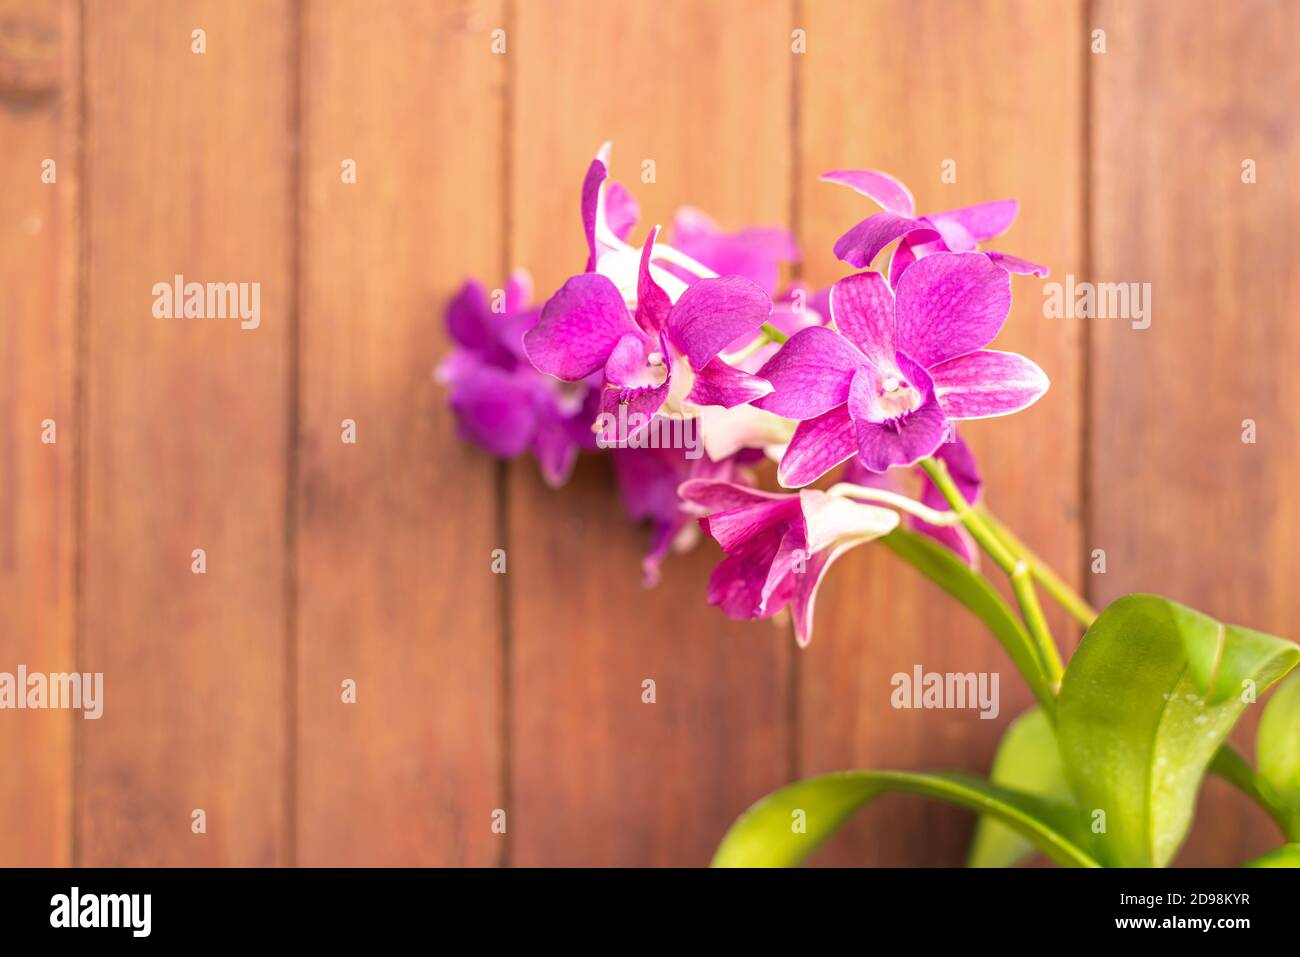 Dendrobium, Purple orchid, Orchid on blurred wooden background, Abstract flower purple color on blur background, Macro Stock Photo